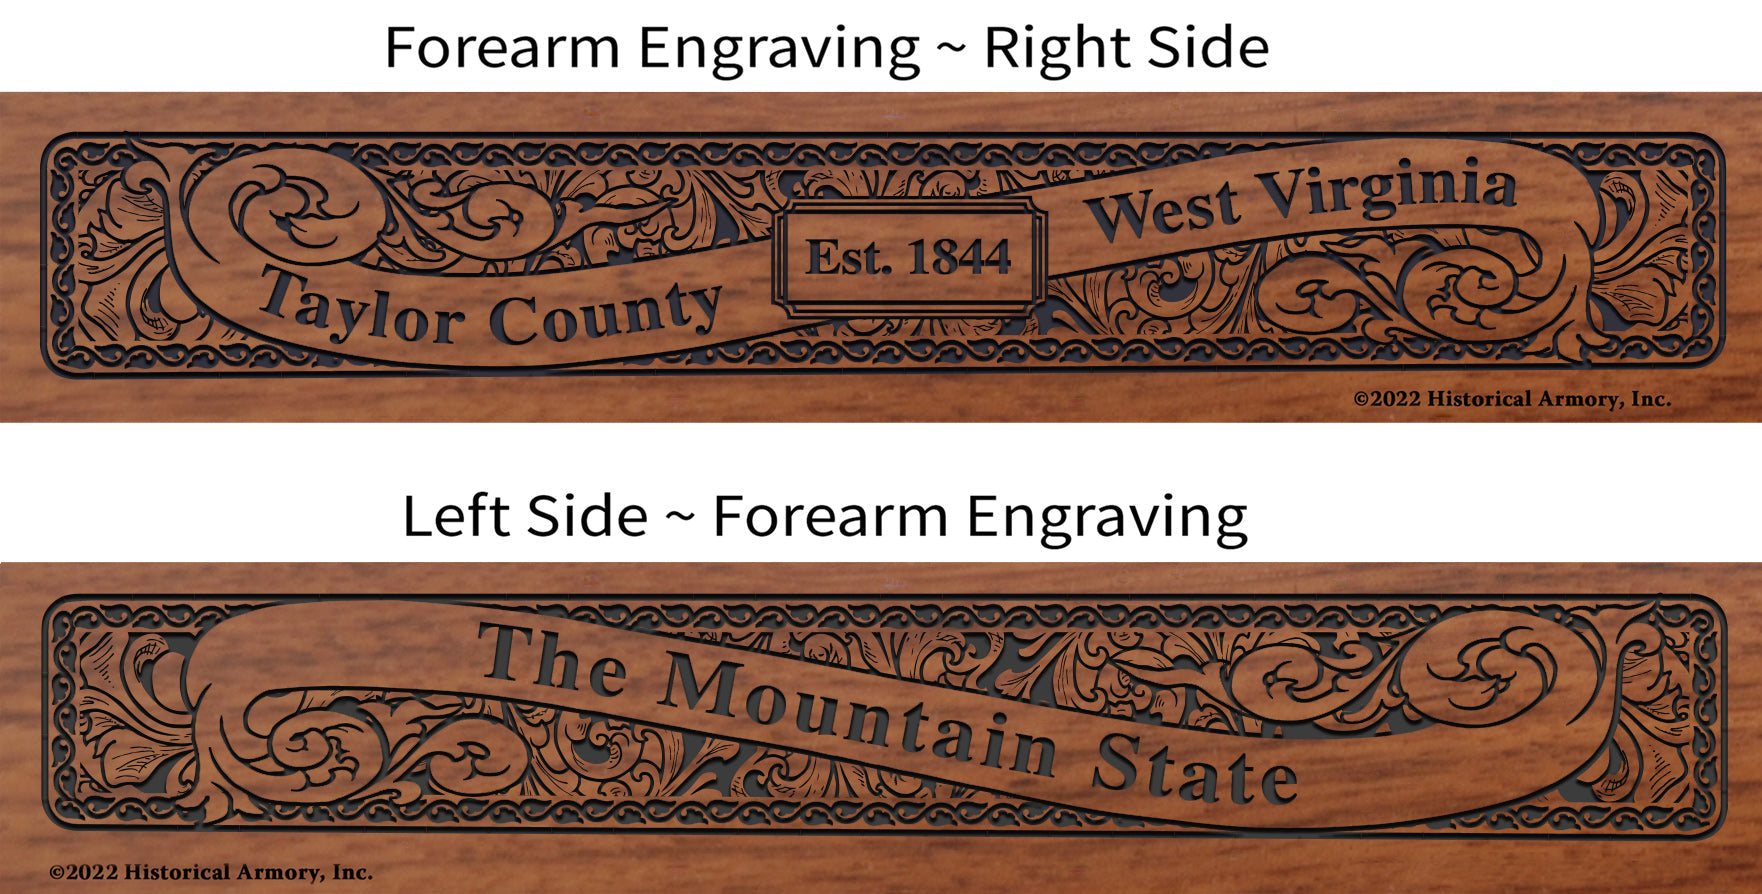 Taylor County West Virginia Engraved Rifle Forearm